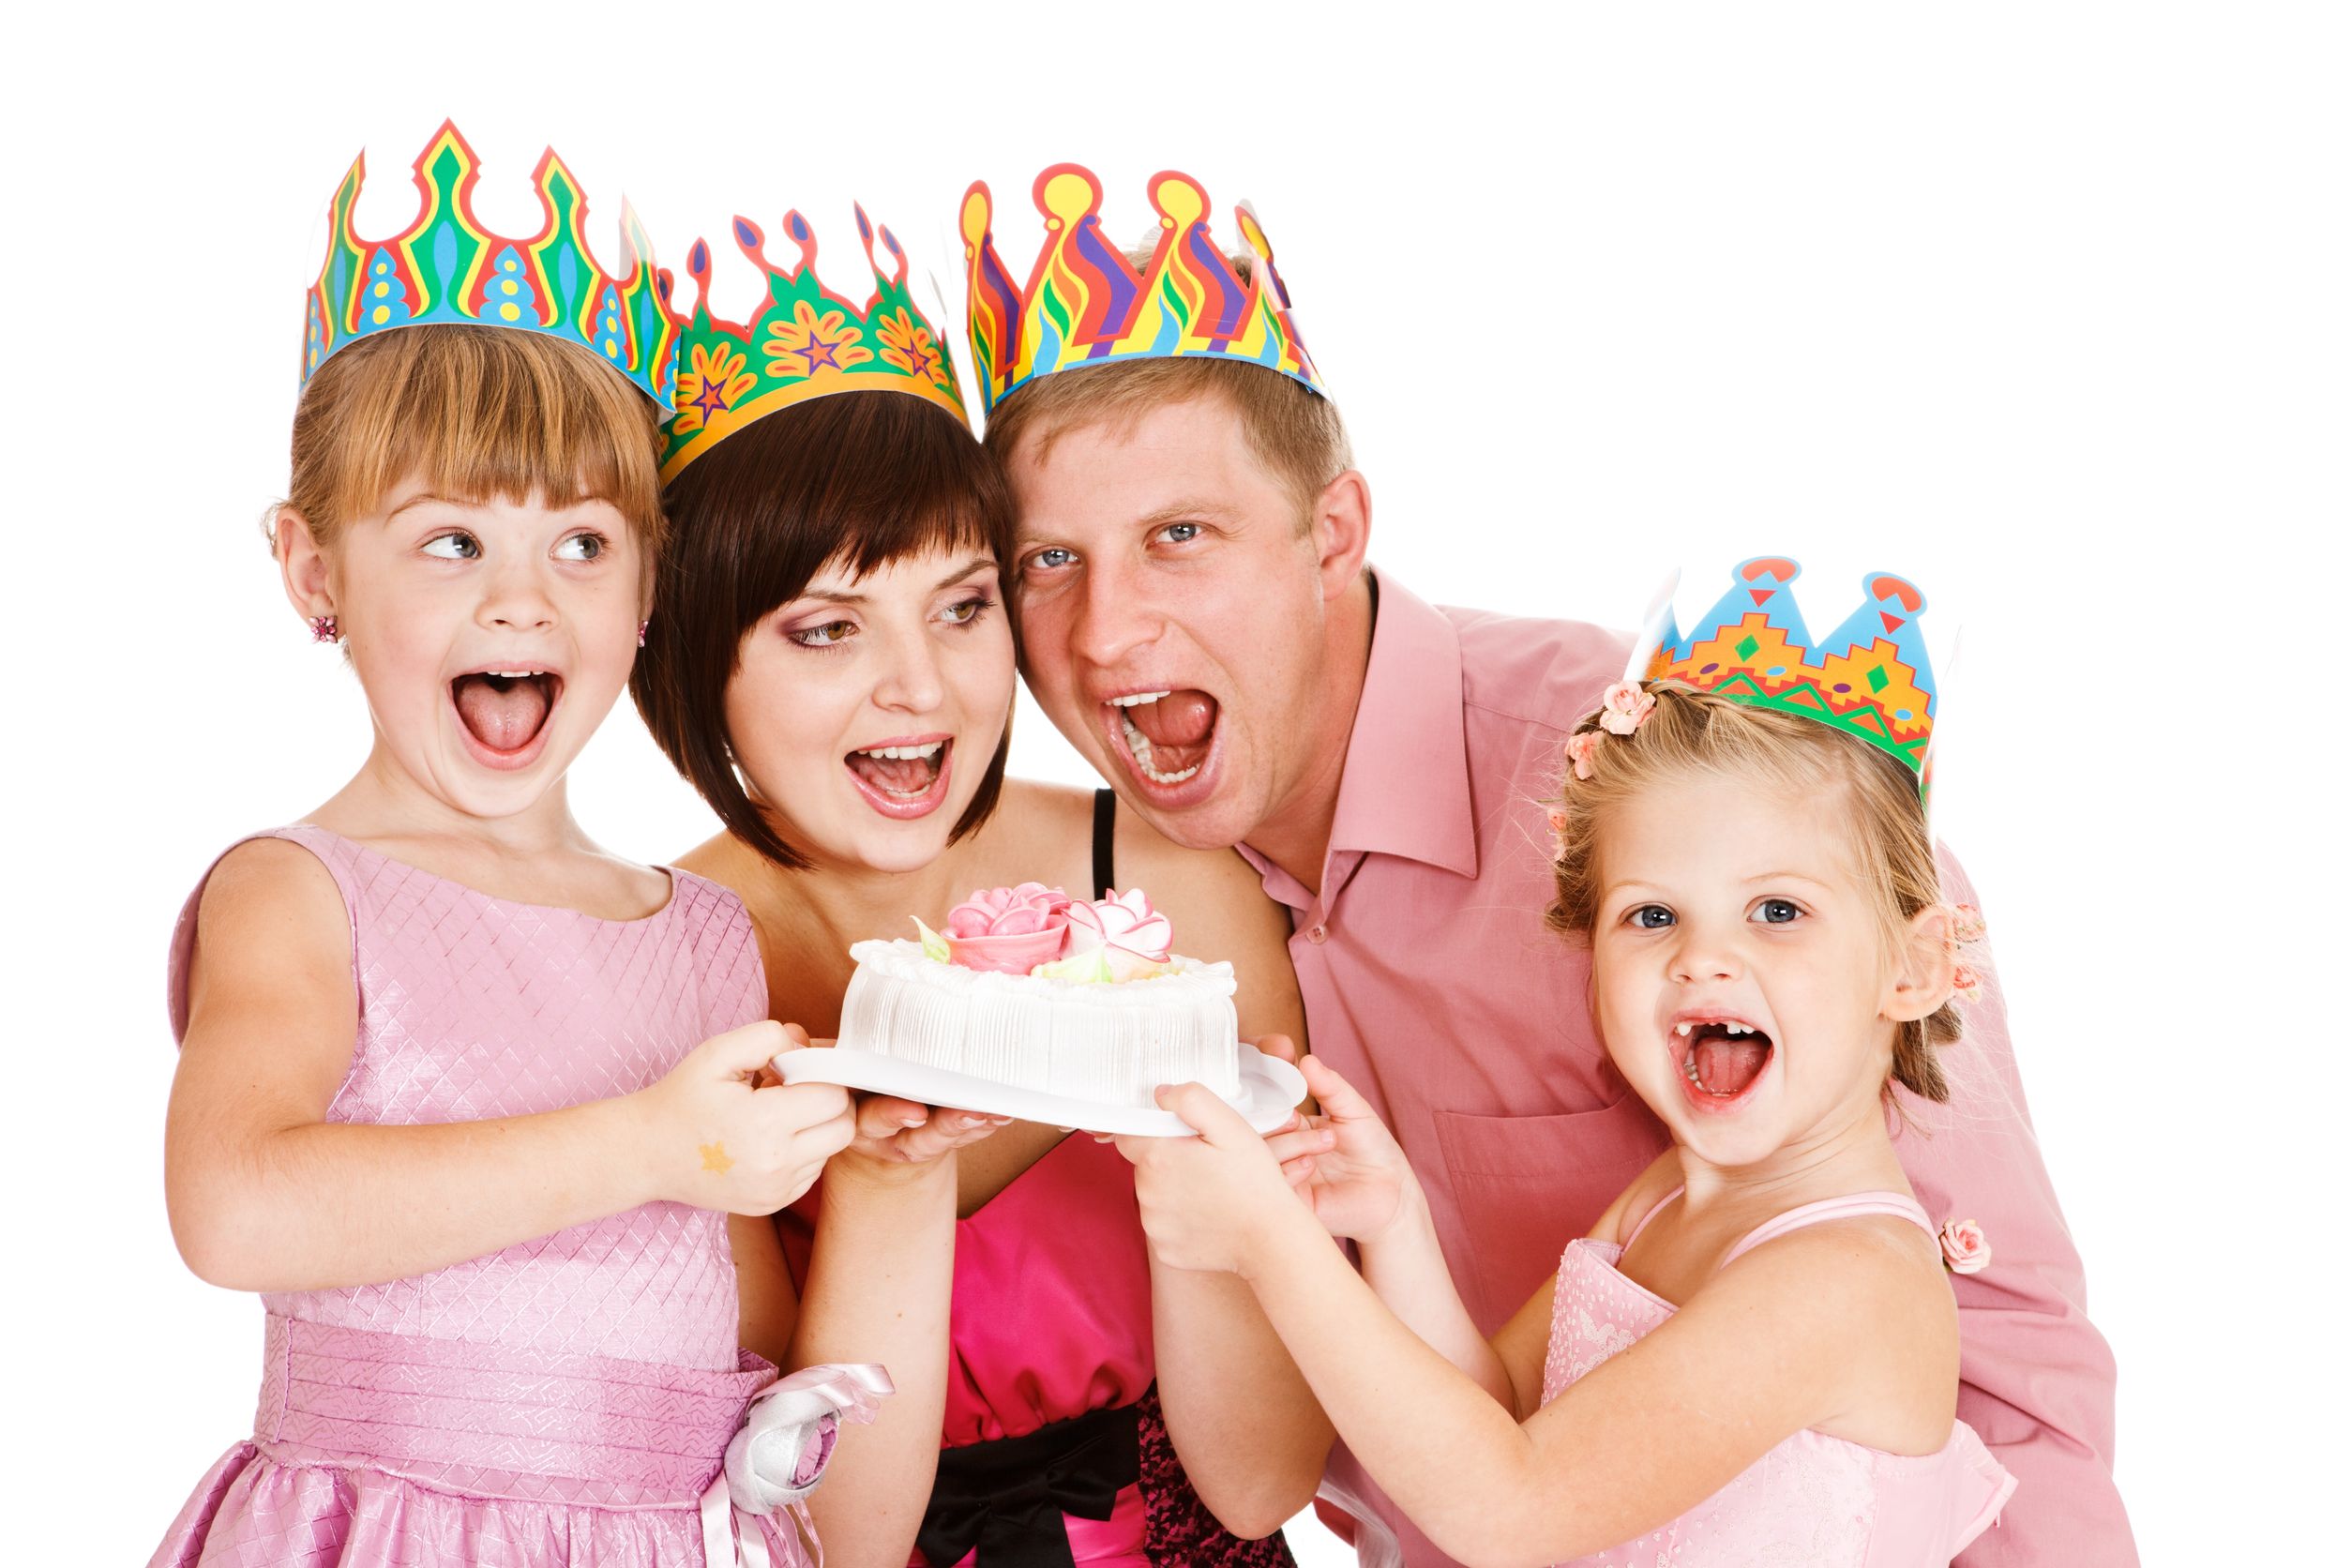 Give Your Child an Amazing Birthday with Birthday Party Places in Suffolk County, NY